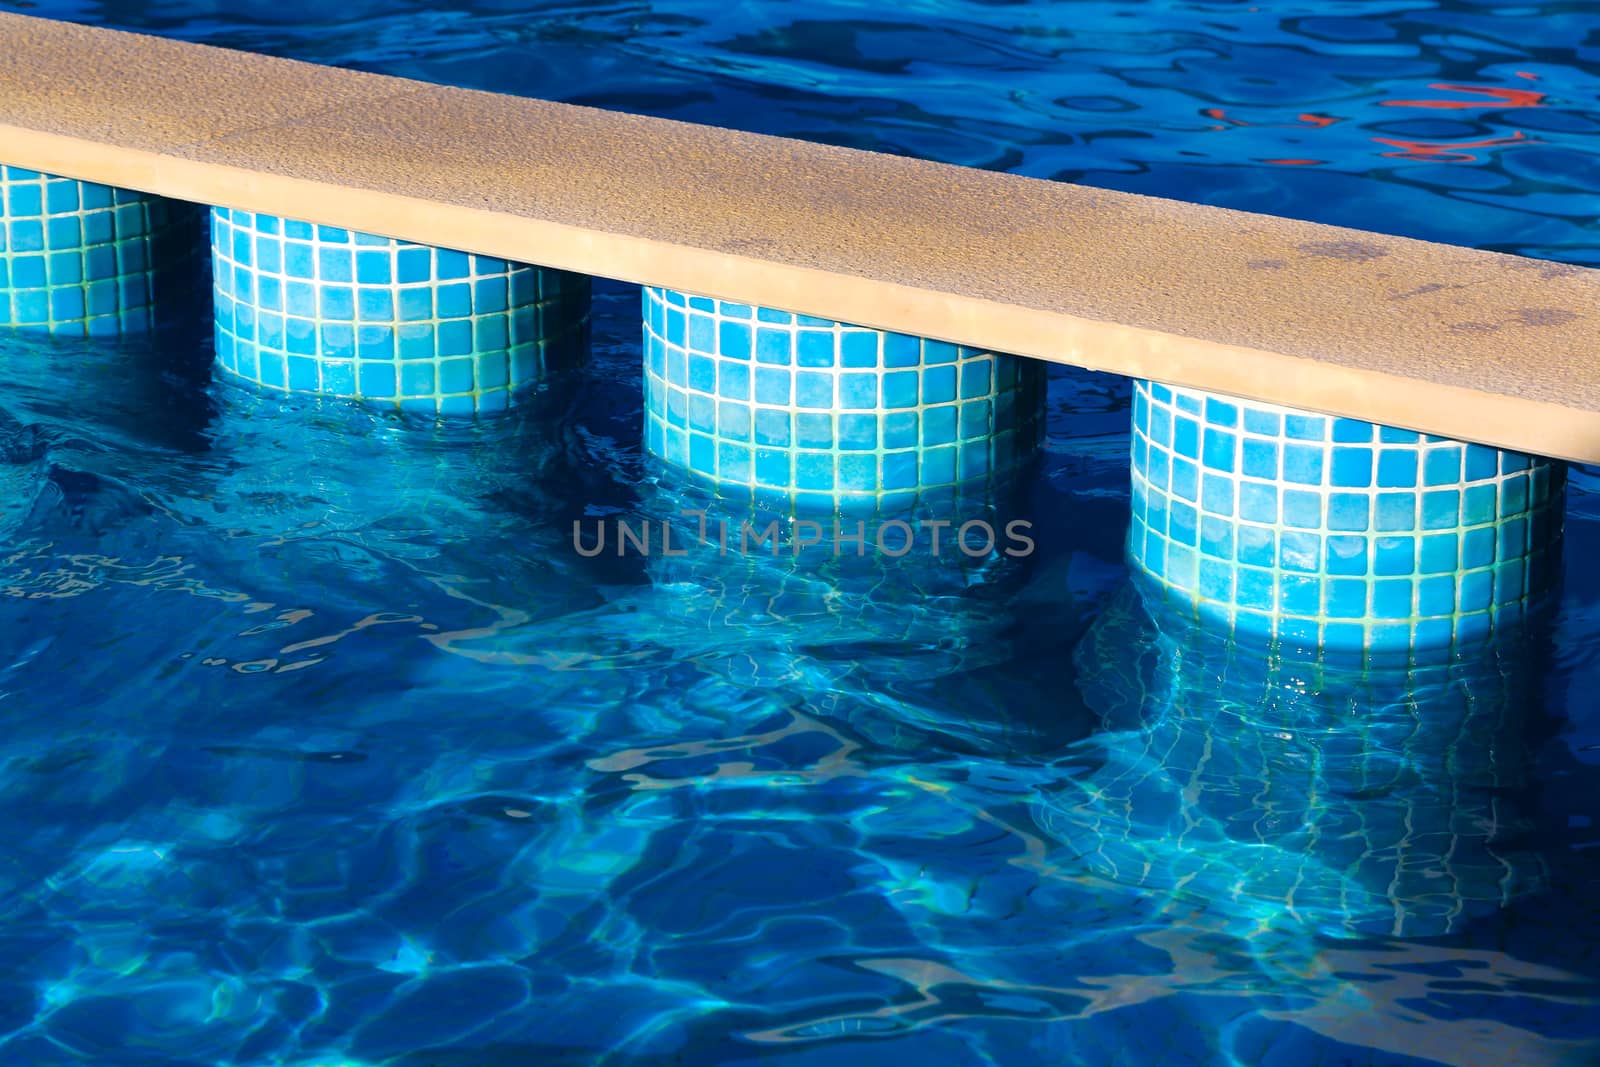 Stair Case in the swimming pool with blue water